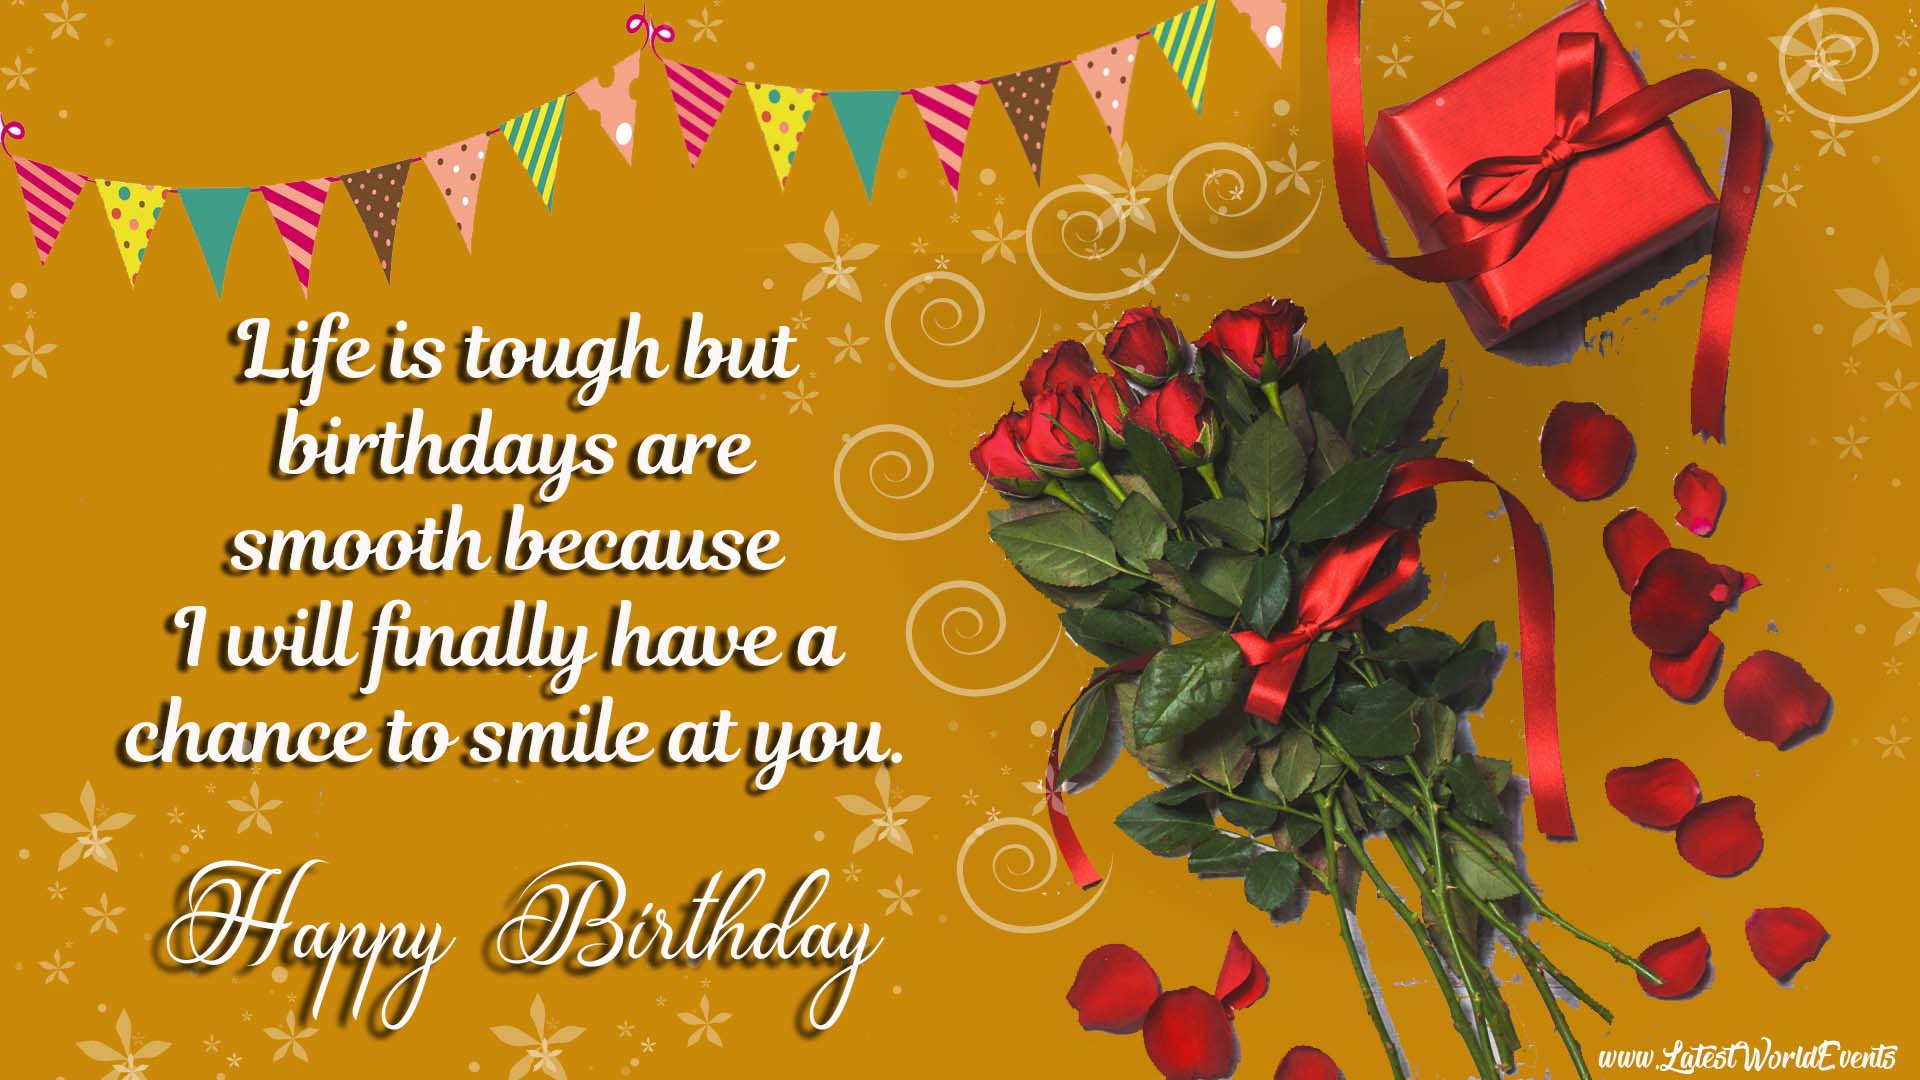 Download-happy-birthday-wishes-images